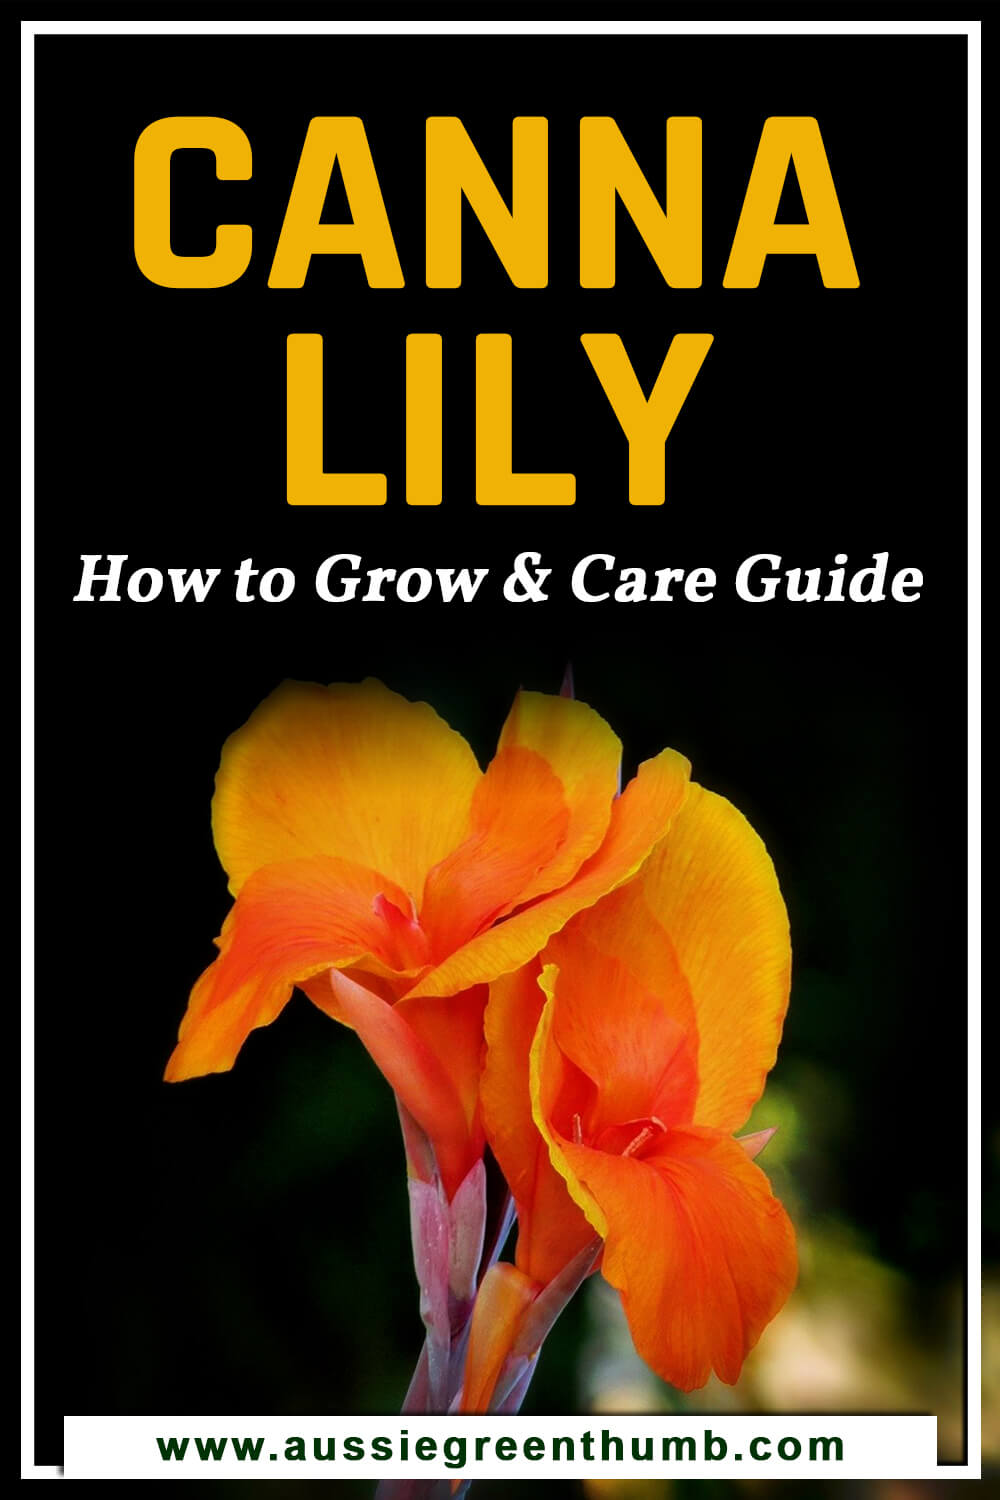 Canna Lily – How to Grow and Care Guide